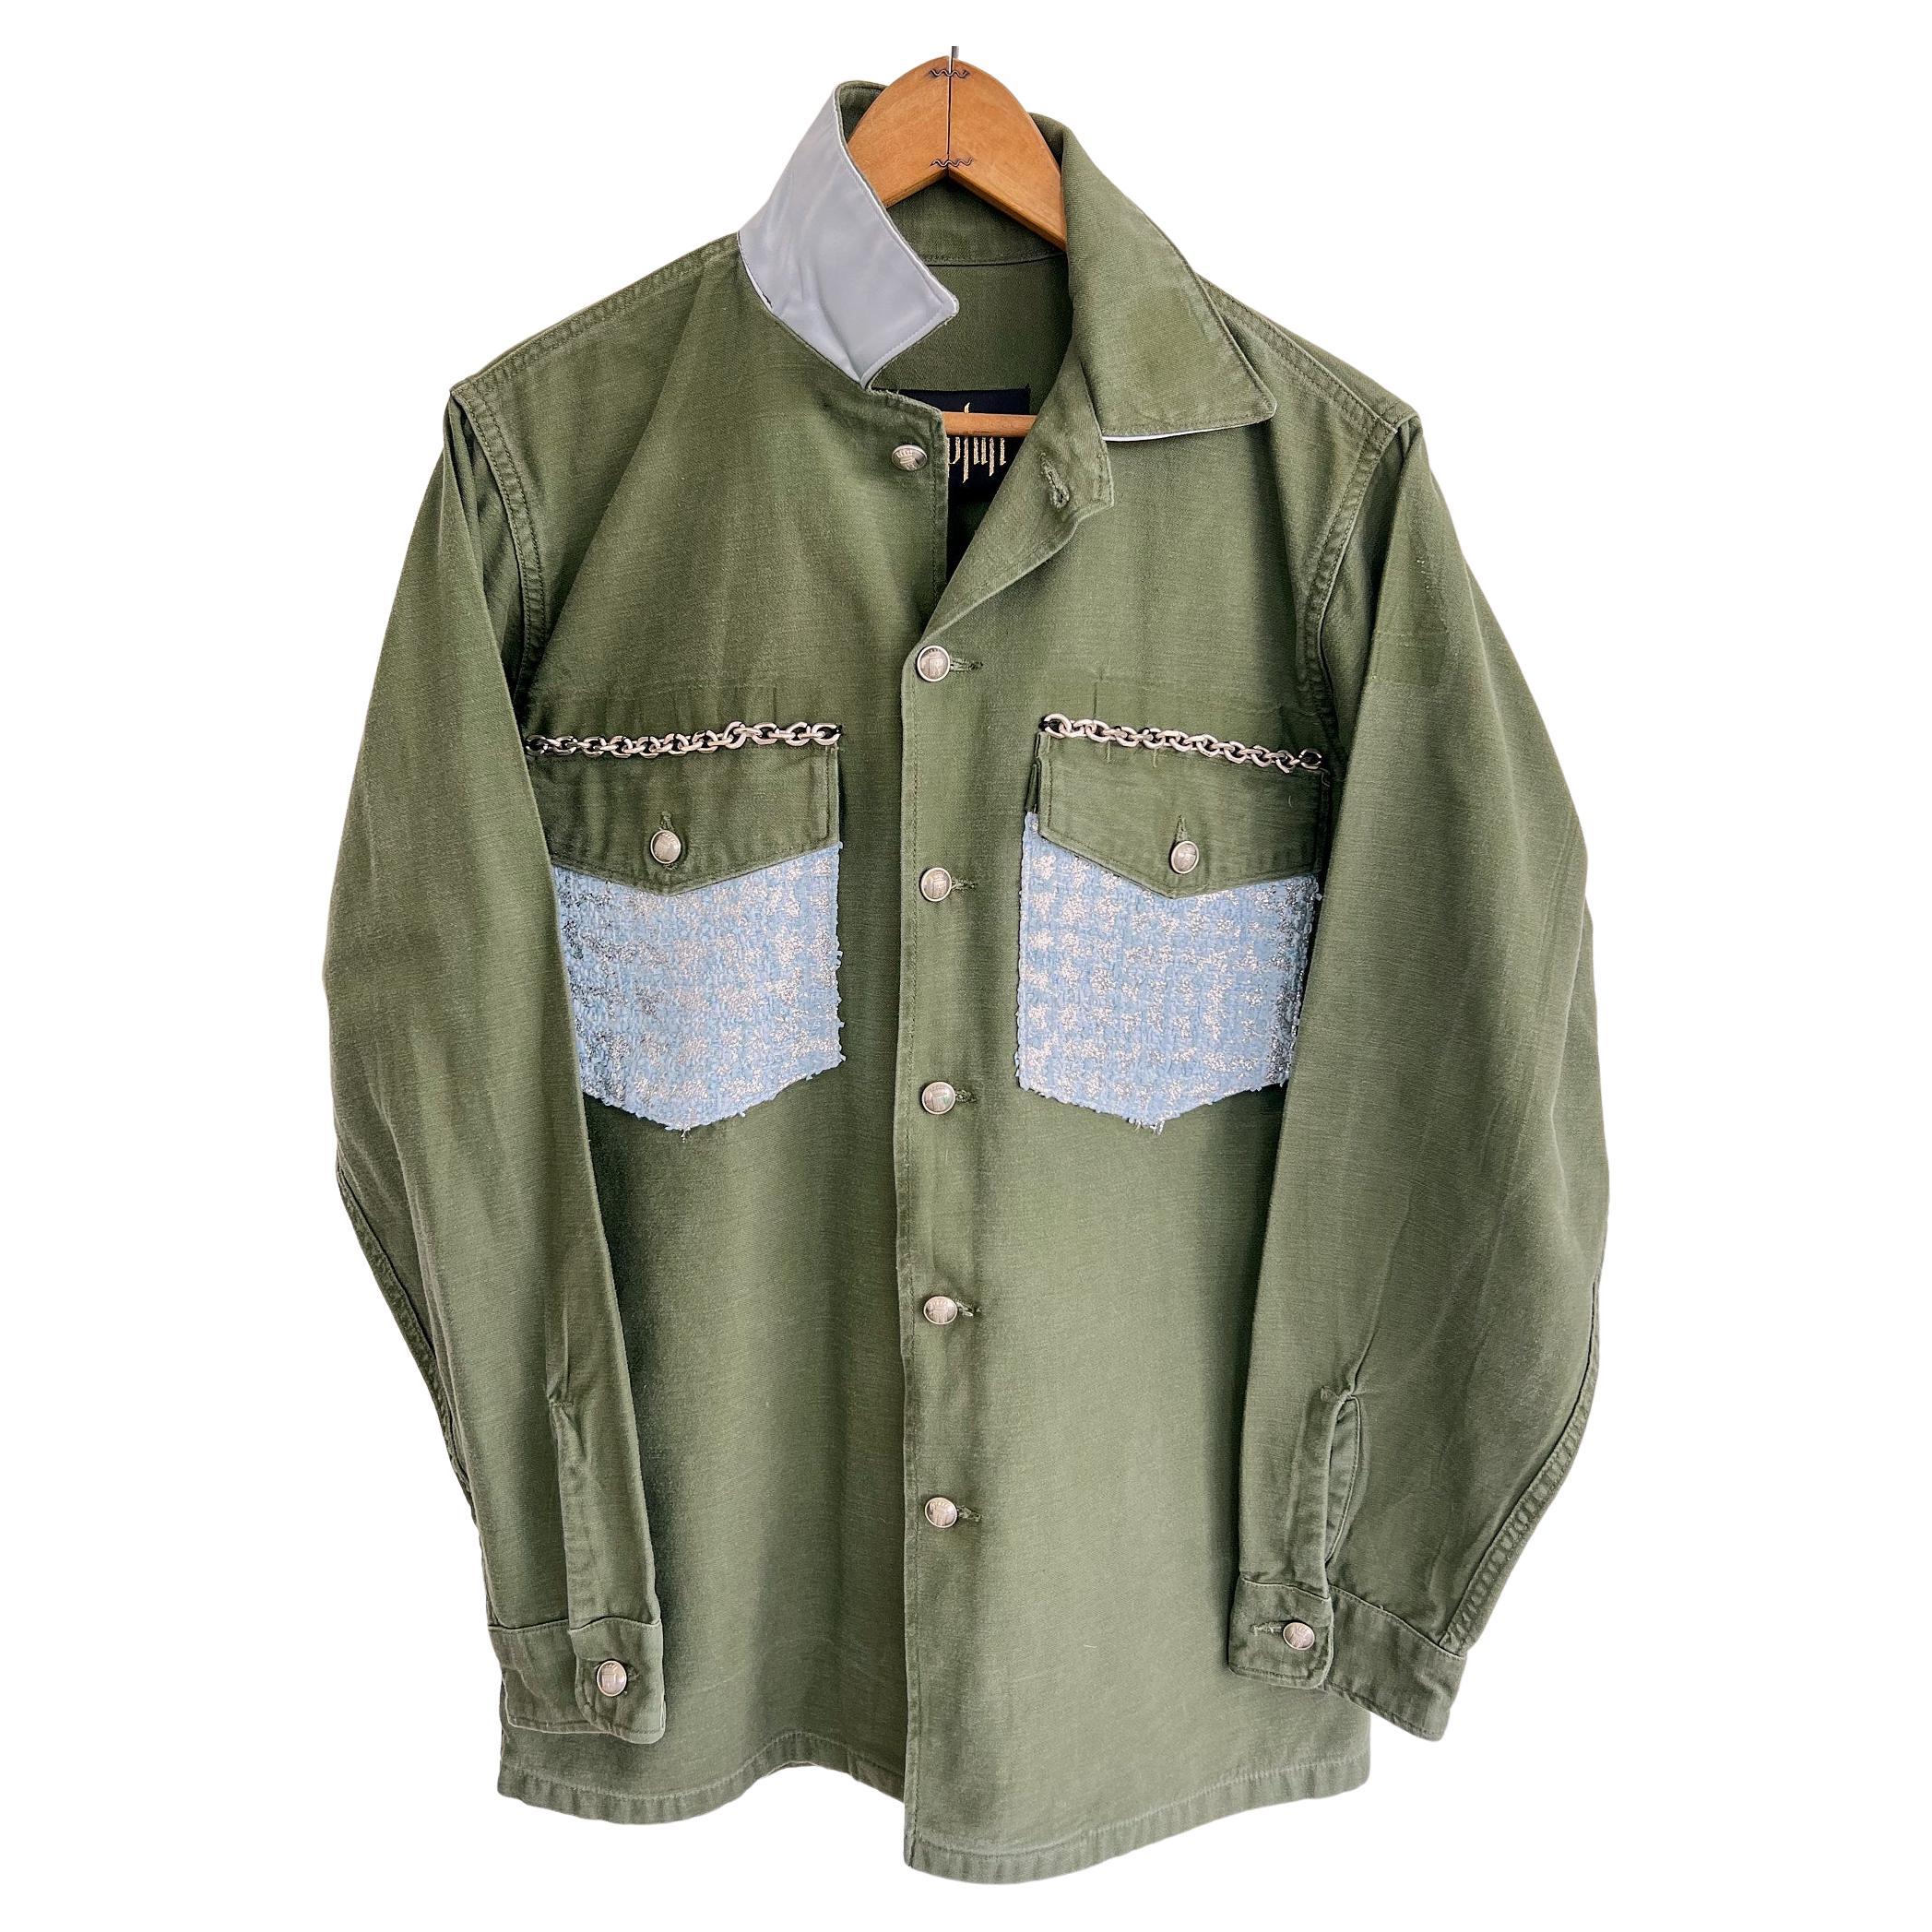 Vintage one of a kind distressed Green Military Jacket with Light Blue Pastel Silver Lurex Tweed Military Jacket Italian Silver Chain, Silver Plated Brass Chain from Italy, Military Silver plated Brass Buttons from Paris
Designer: J Dauphin
Size: